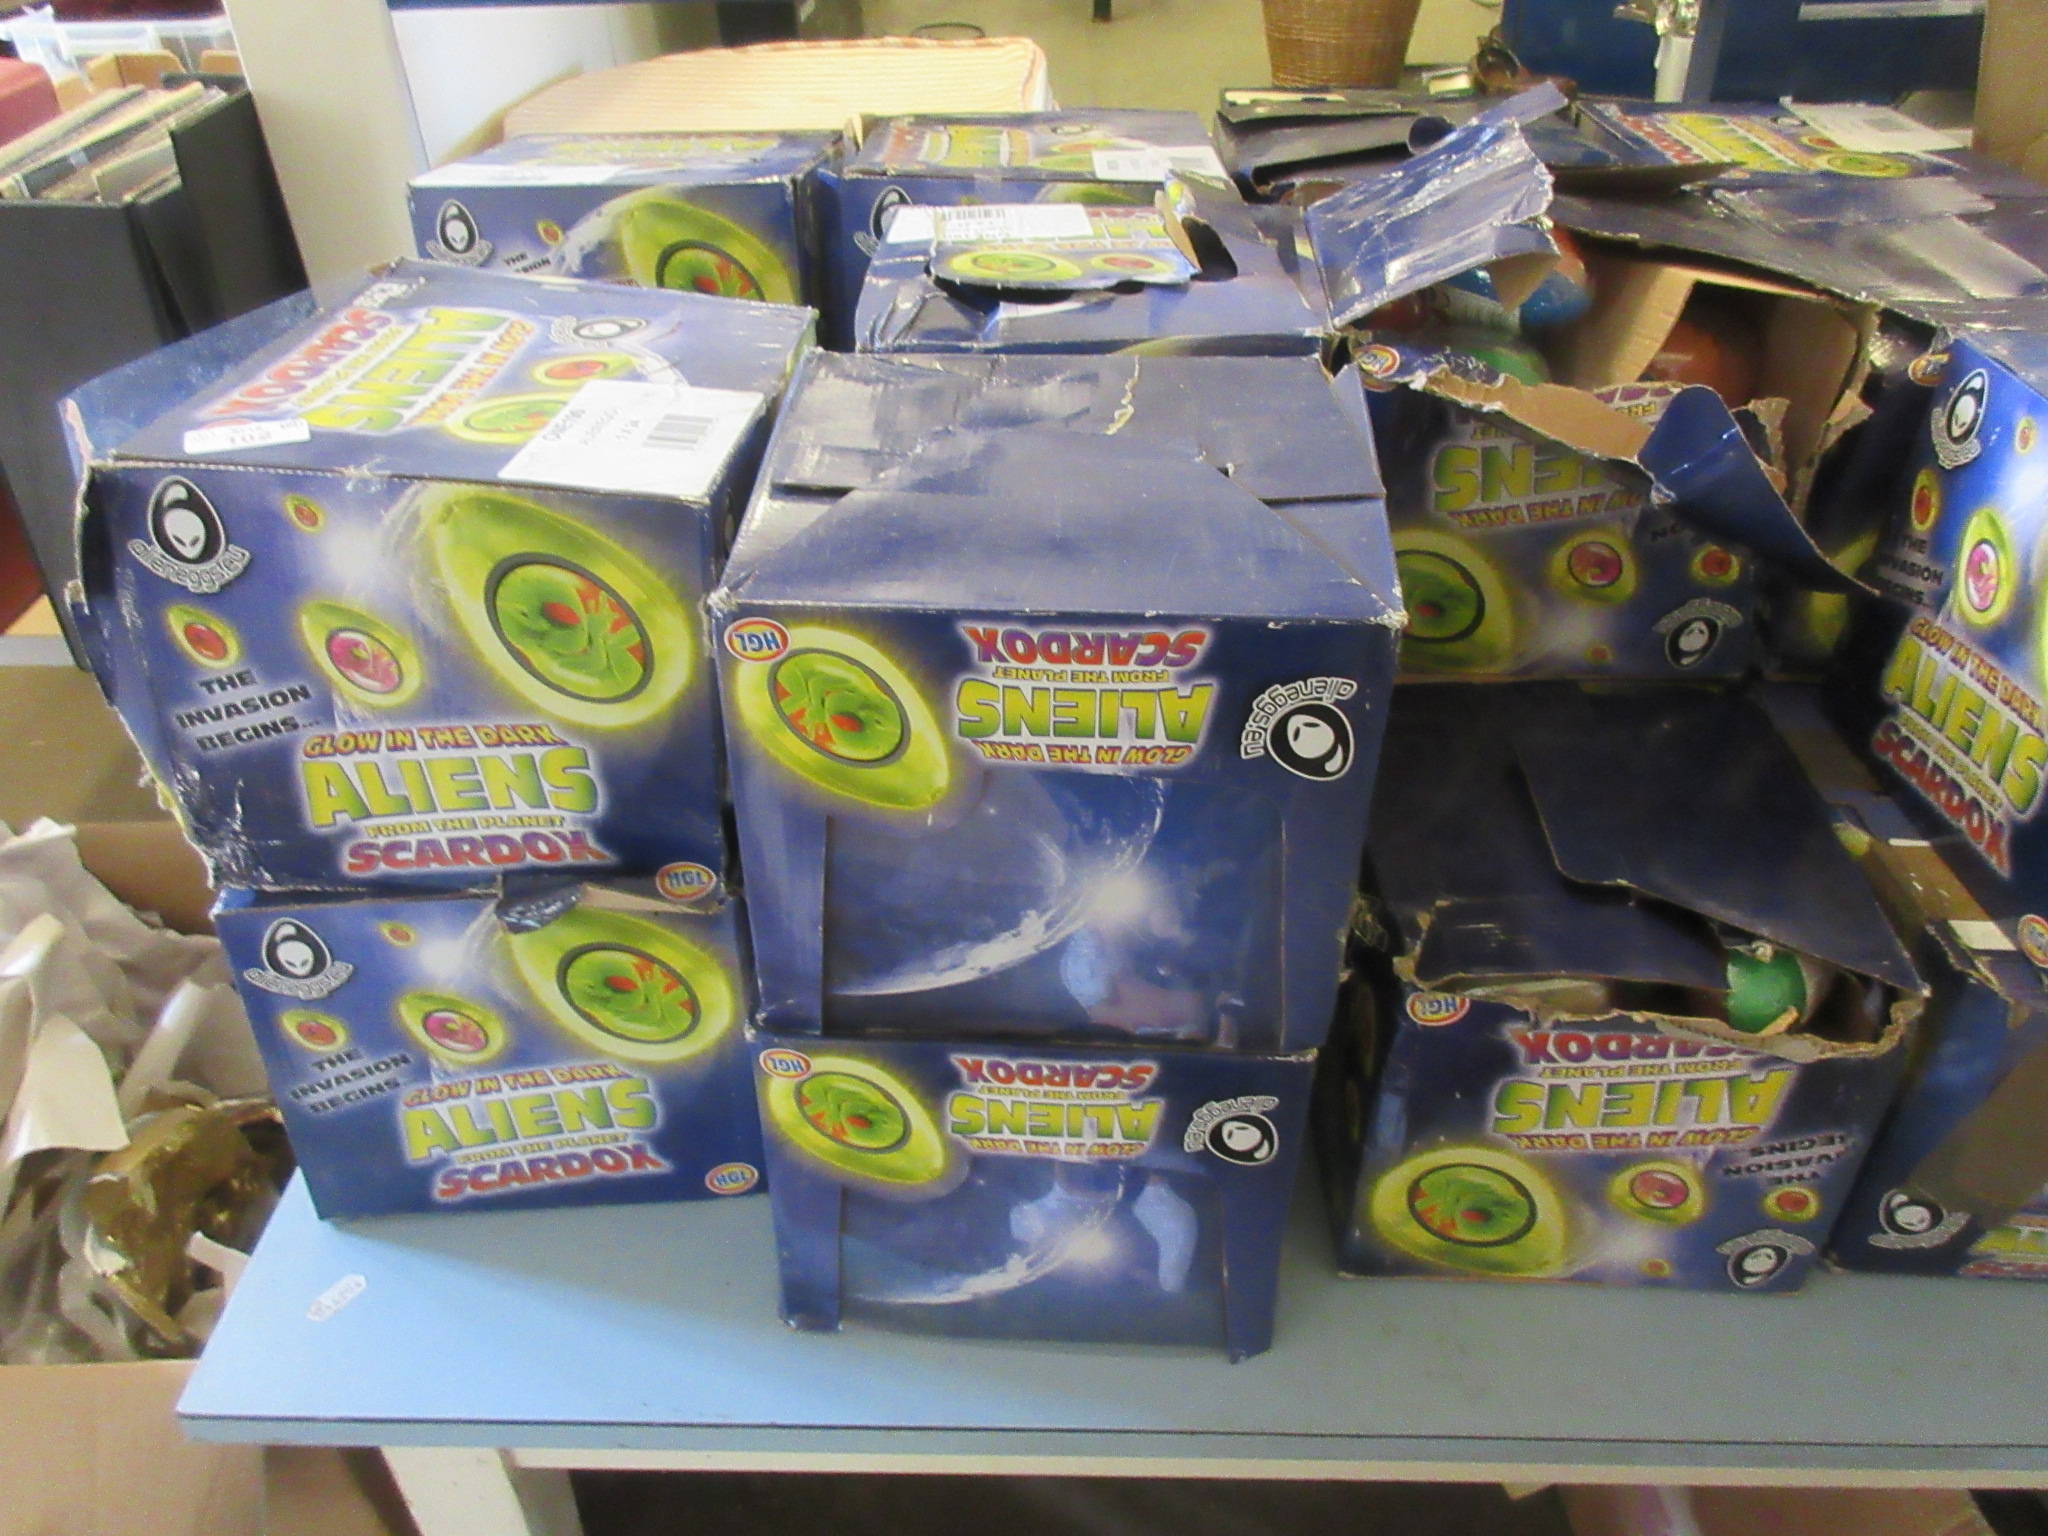 TEN BOXES OF GLOW IN THE DARK ALIENS FROM THE PLANET SKARDOS TOYS (ALIEN EGGS), EACH BOX